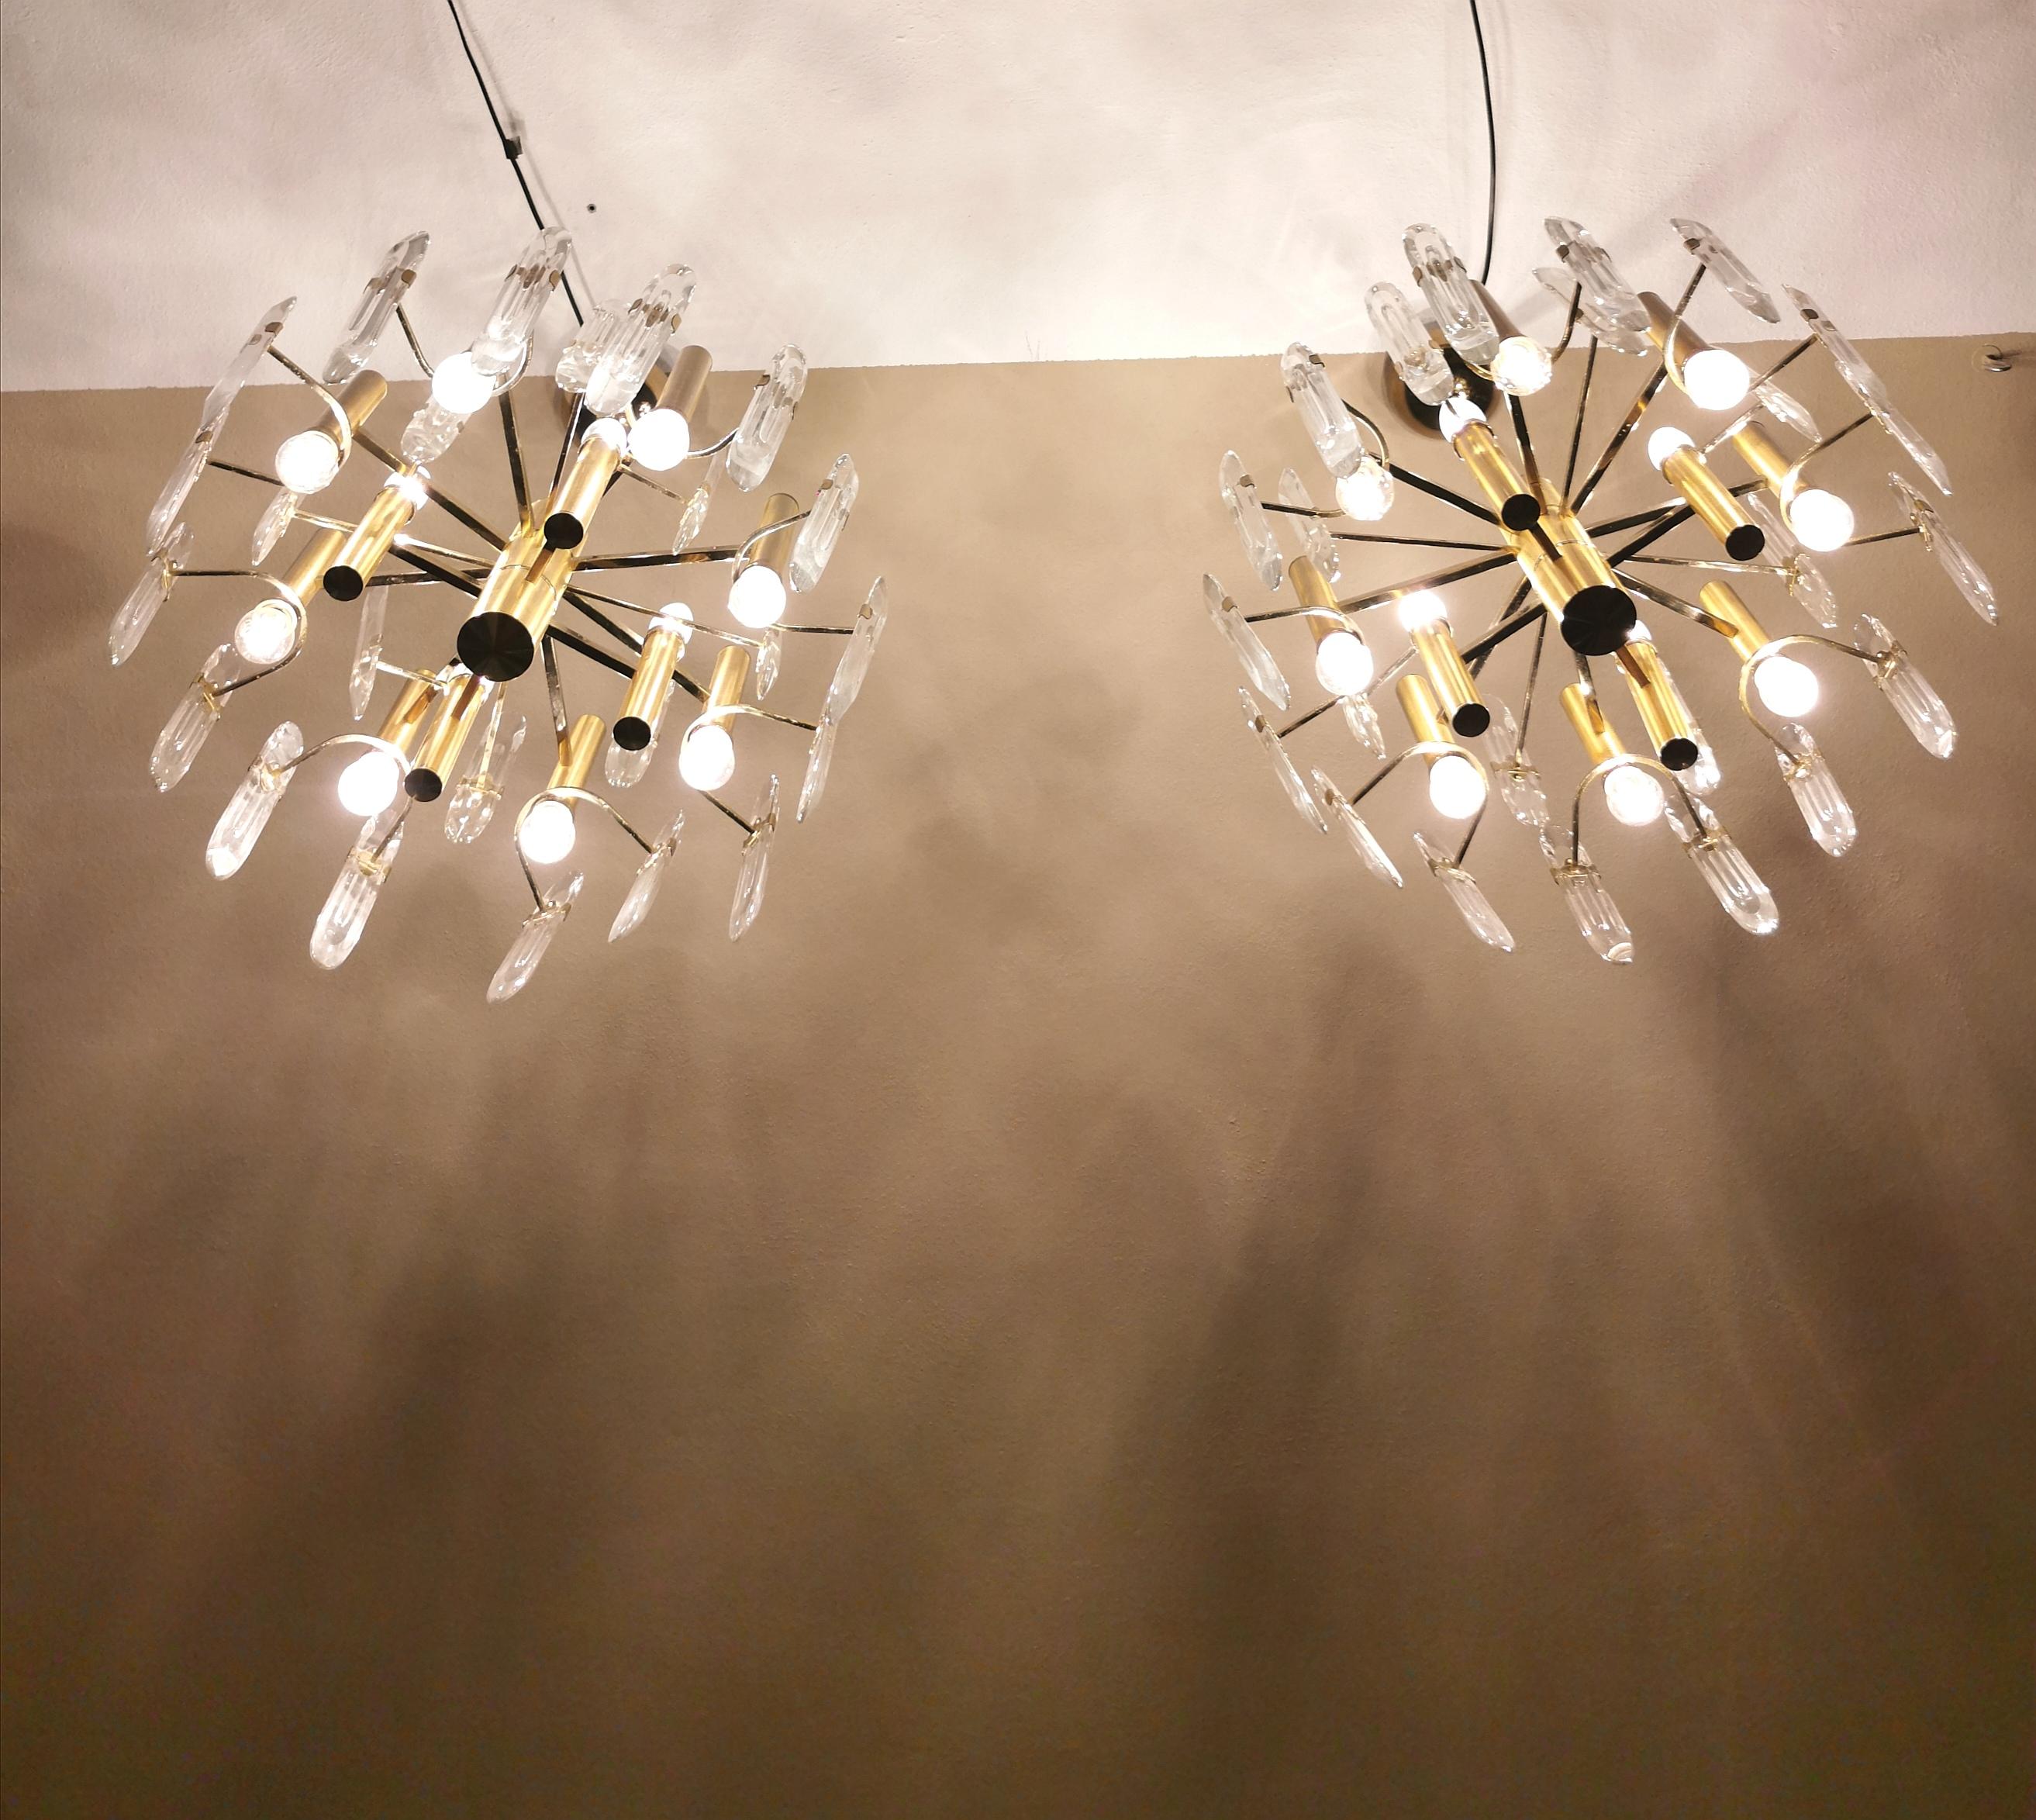 Set of 2 chandeliers designed by the Italian designer Gaetano Sciolari. each single chandelier has 4 lights in the upper part and 8 E27 lights in the lower part, with a brass and golden aluminum structure supporting 16 ellipse-shaped beveled crystal